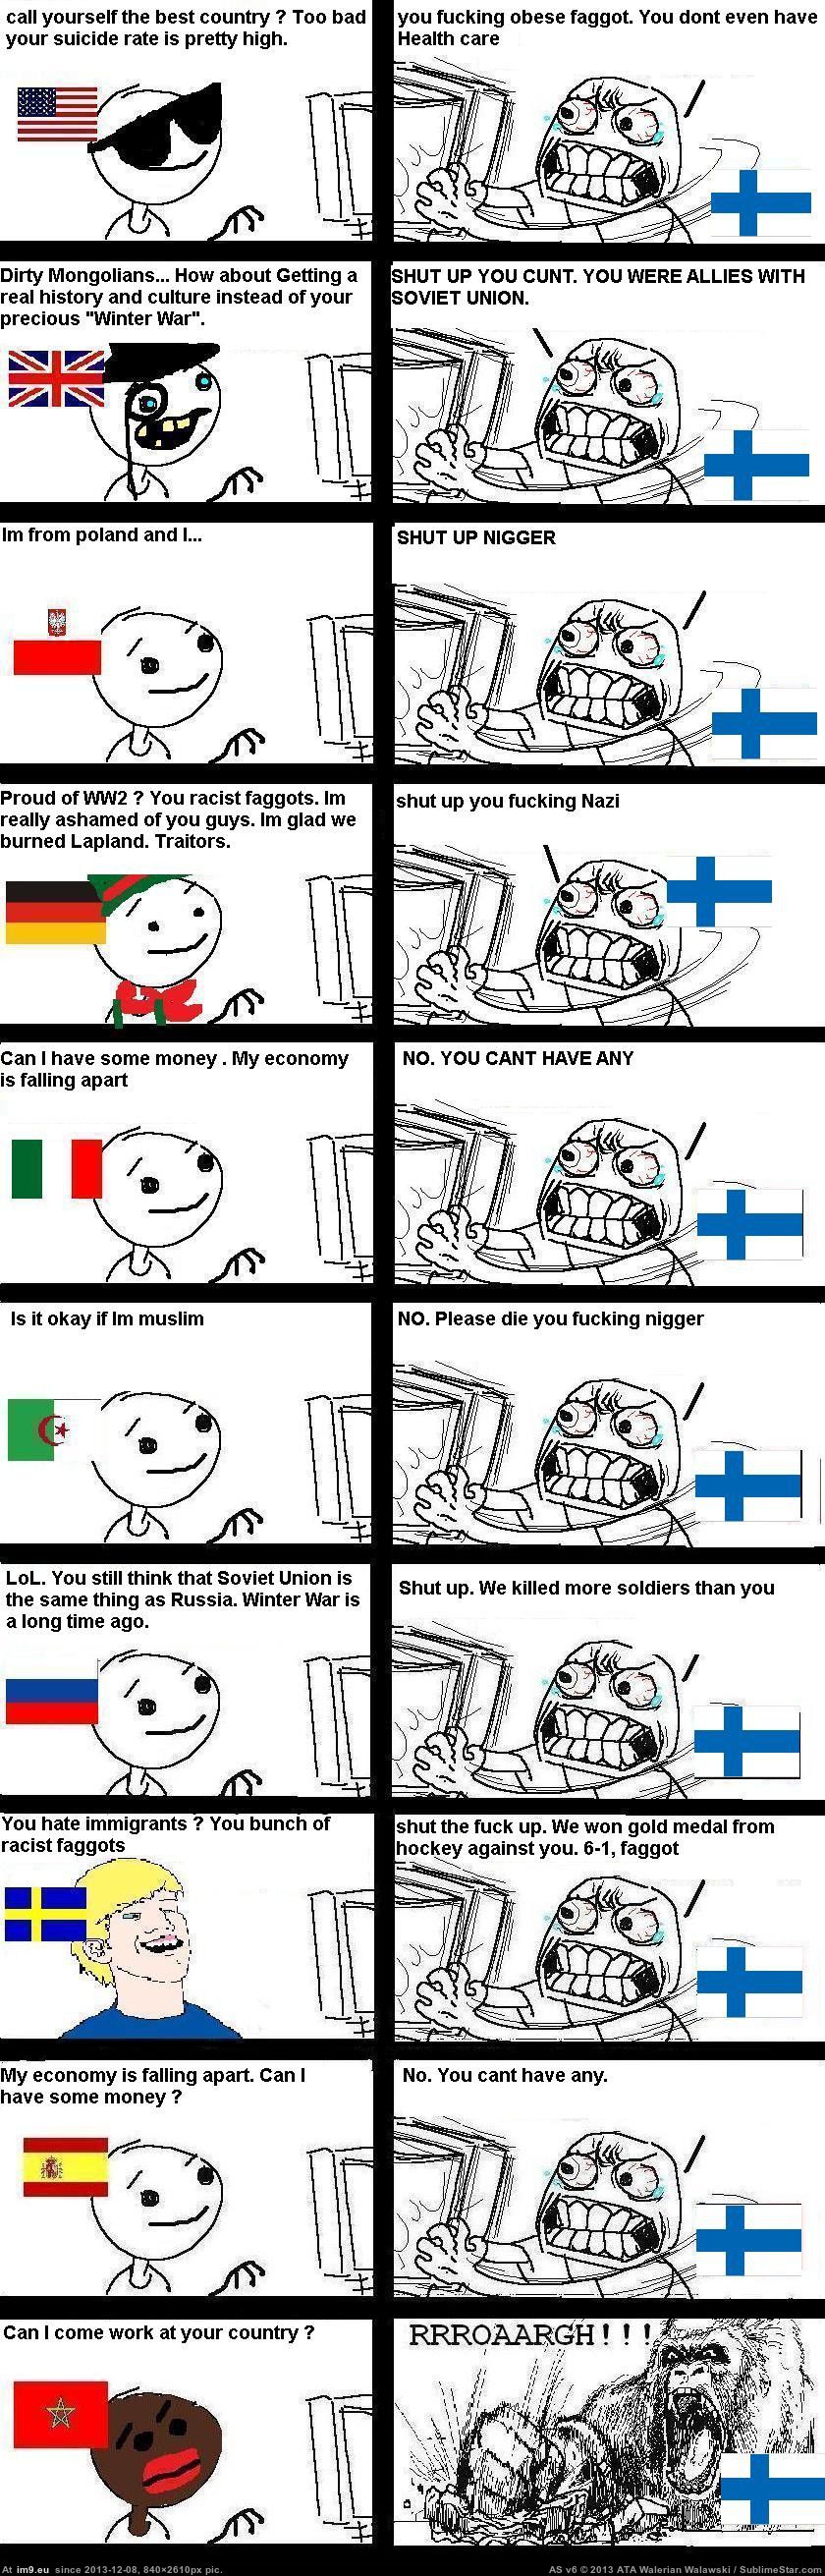 Finland2 (trolling) (in Trolling different Nations (Countries))